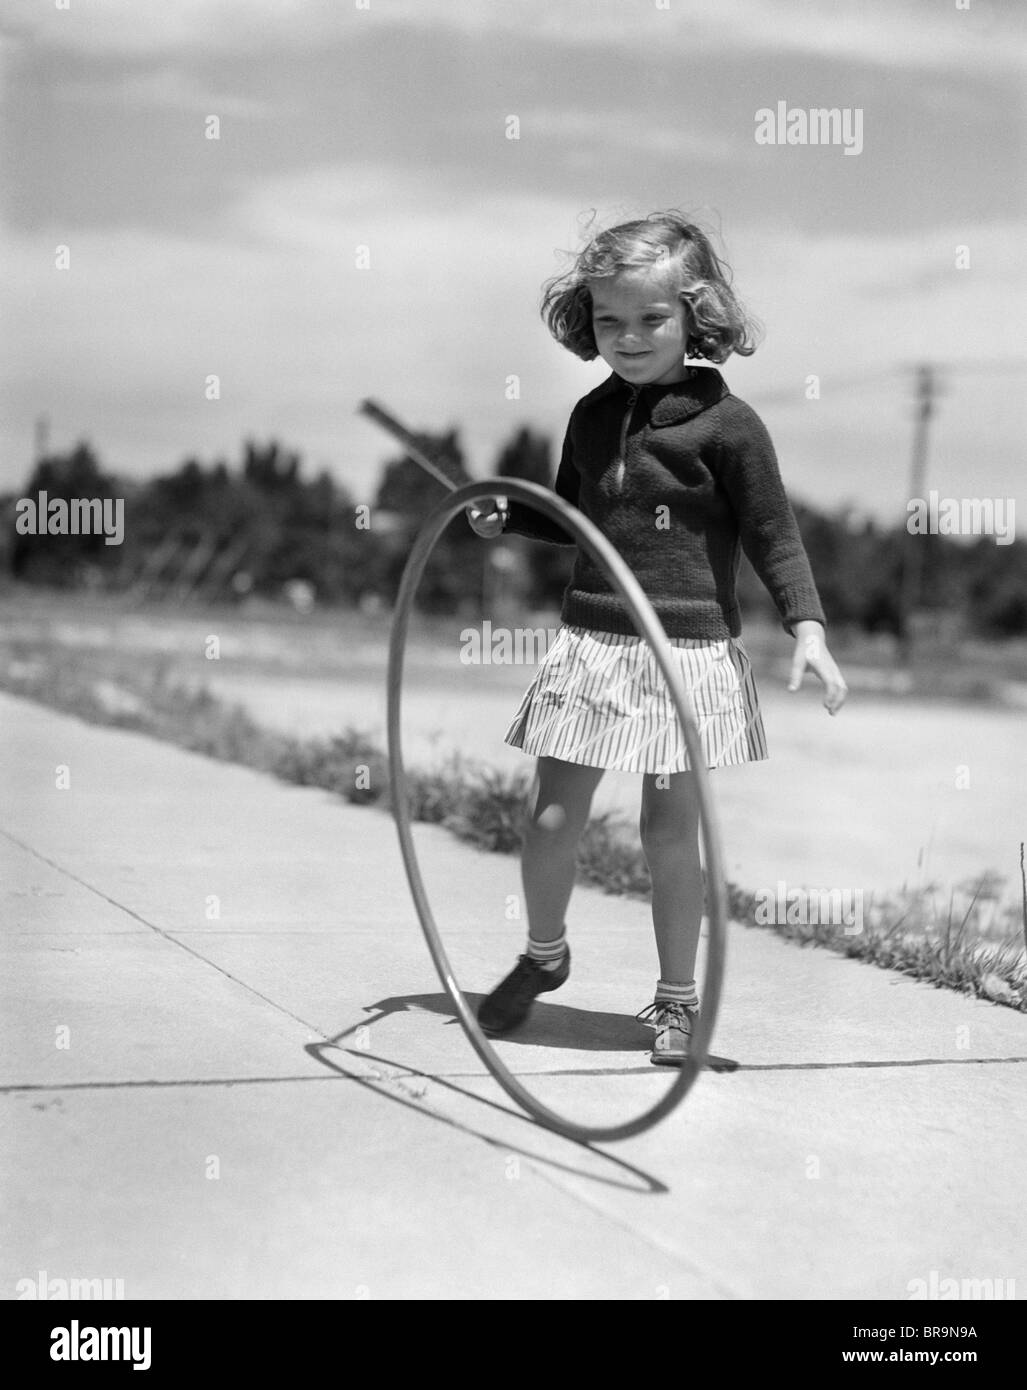 1930s GIRL PLAYING WITH HOOP AND STICK ON SIDEWALK Stock Photo